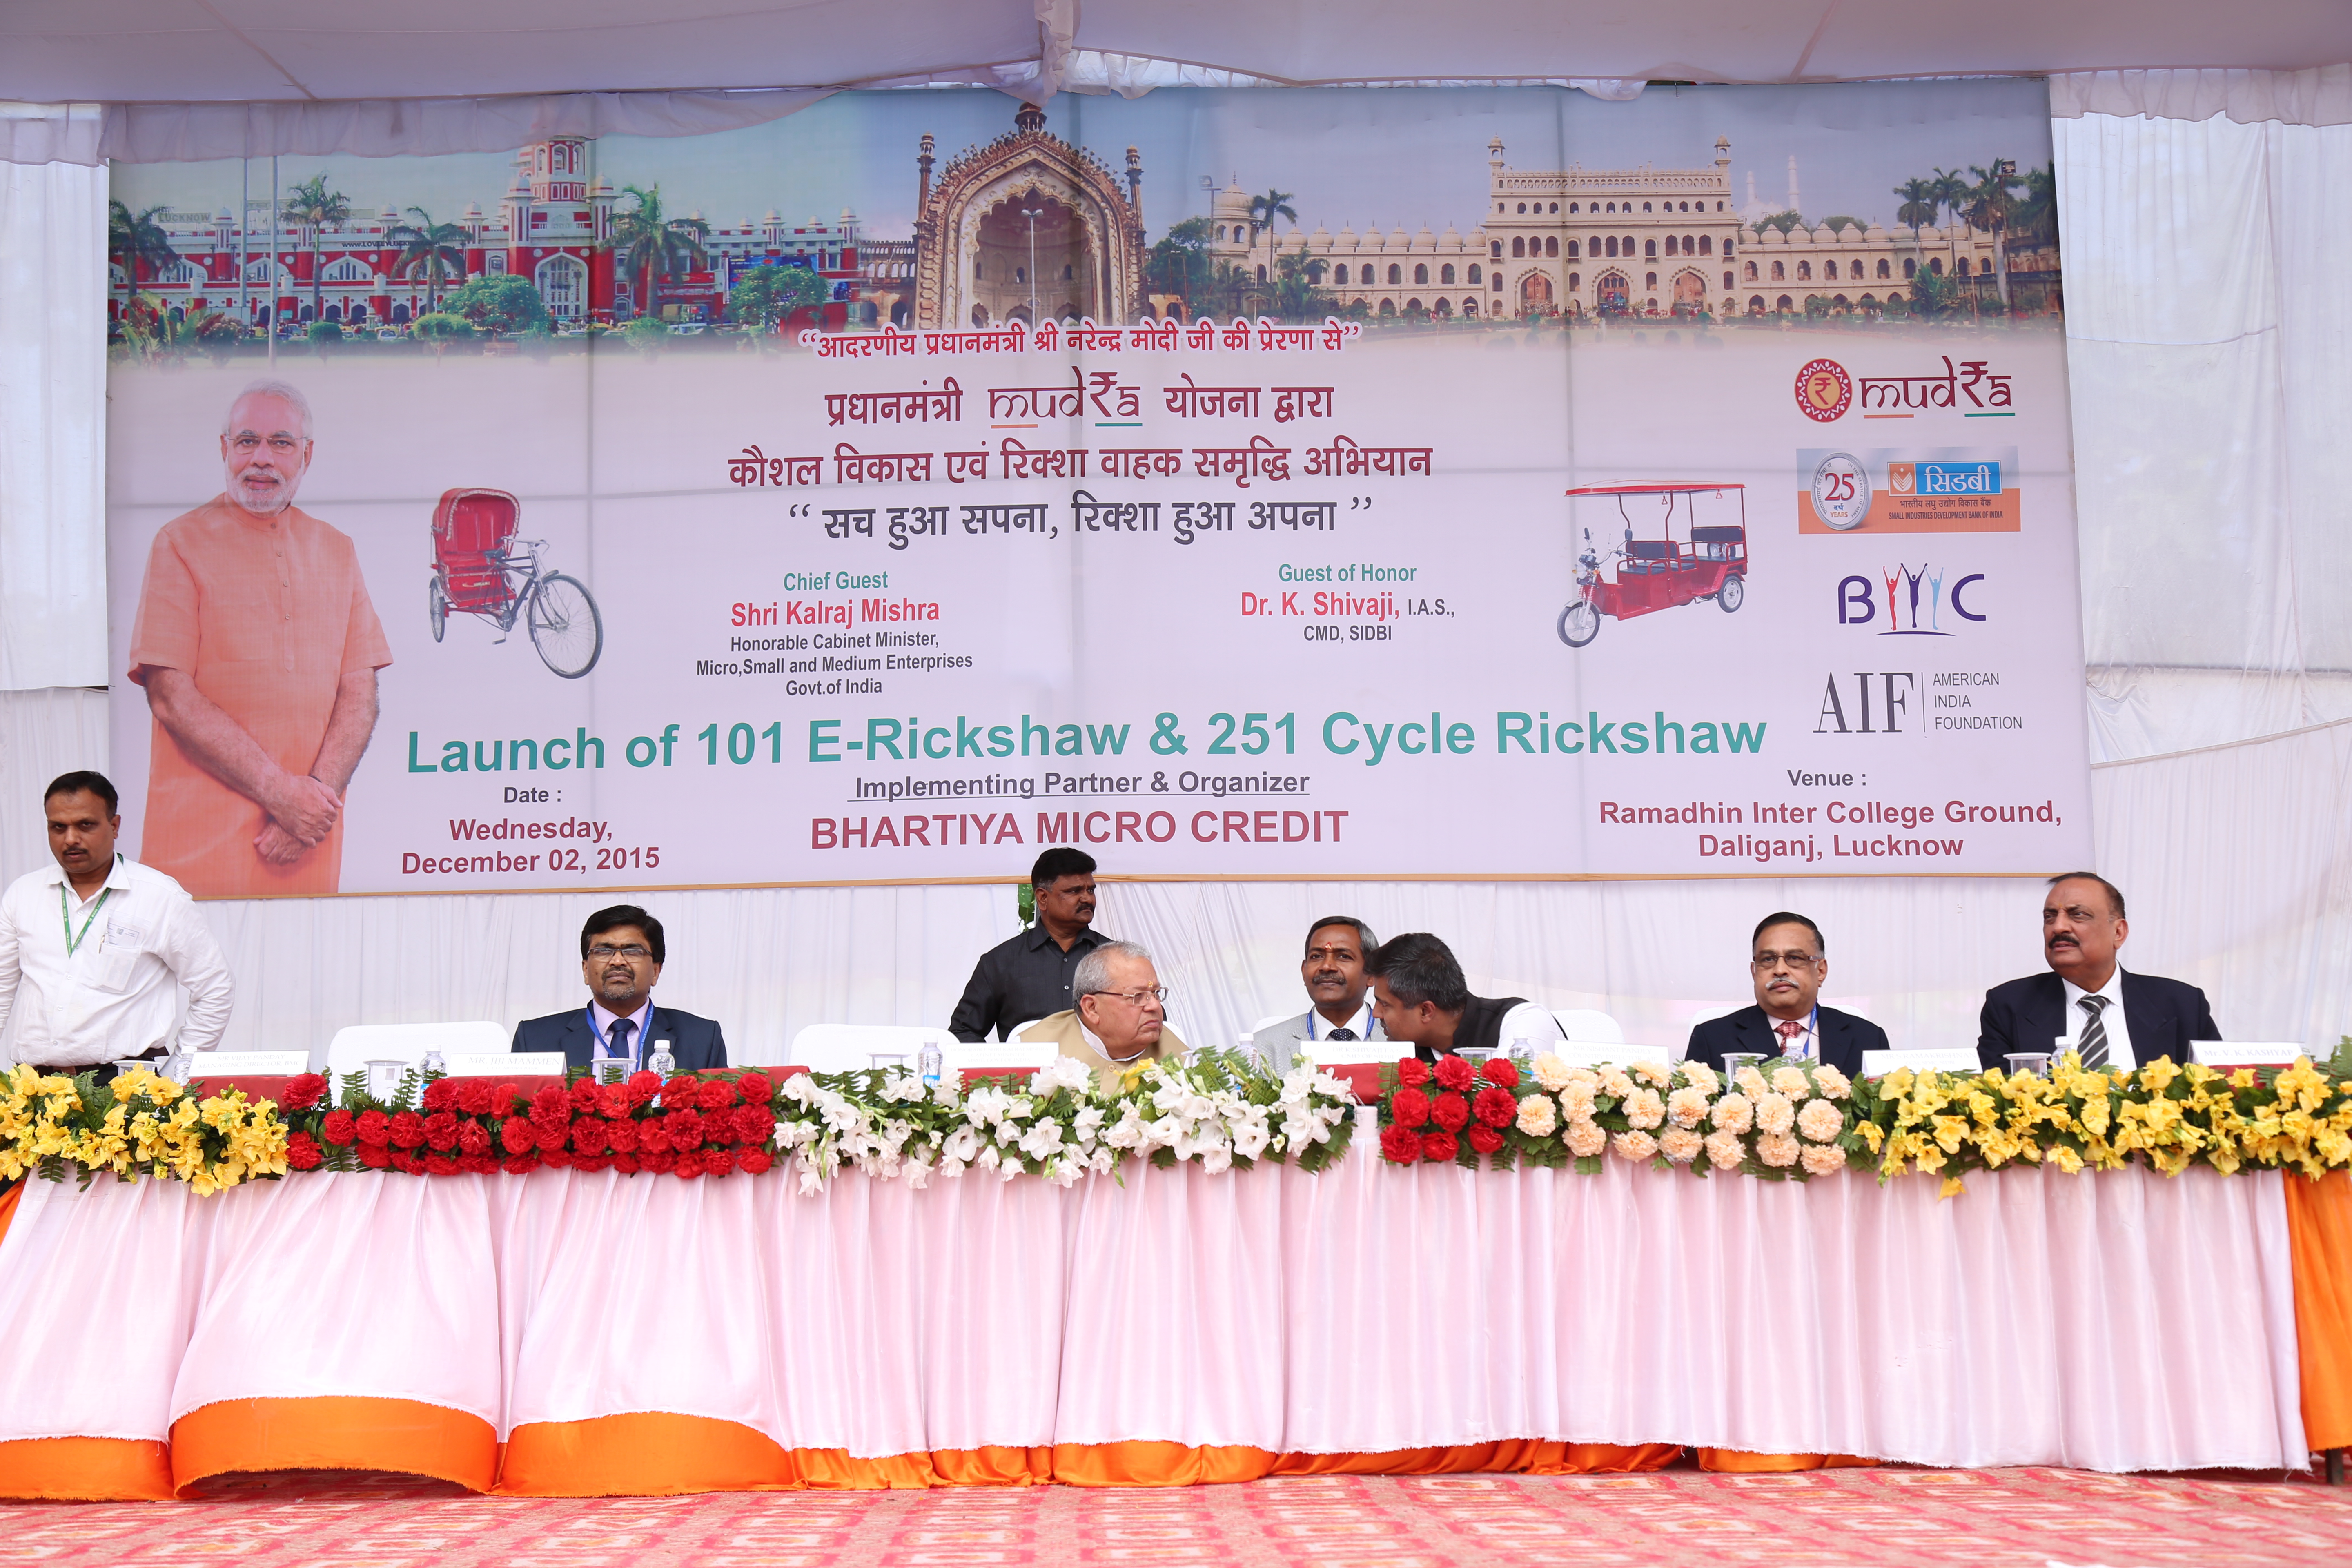 Launch of E-Rickshaw at Lucknow